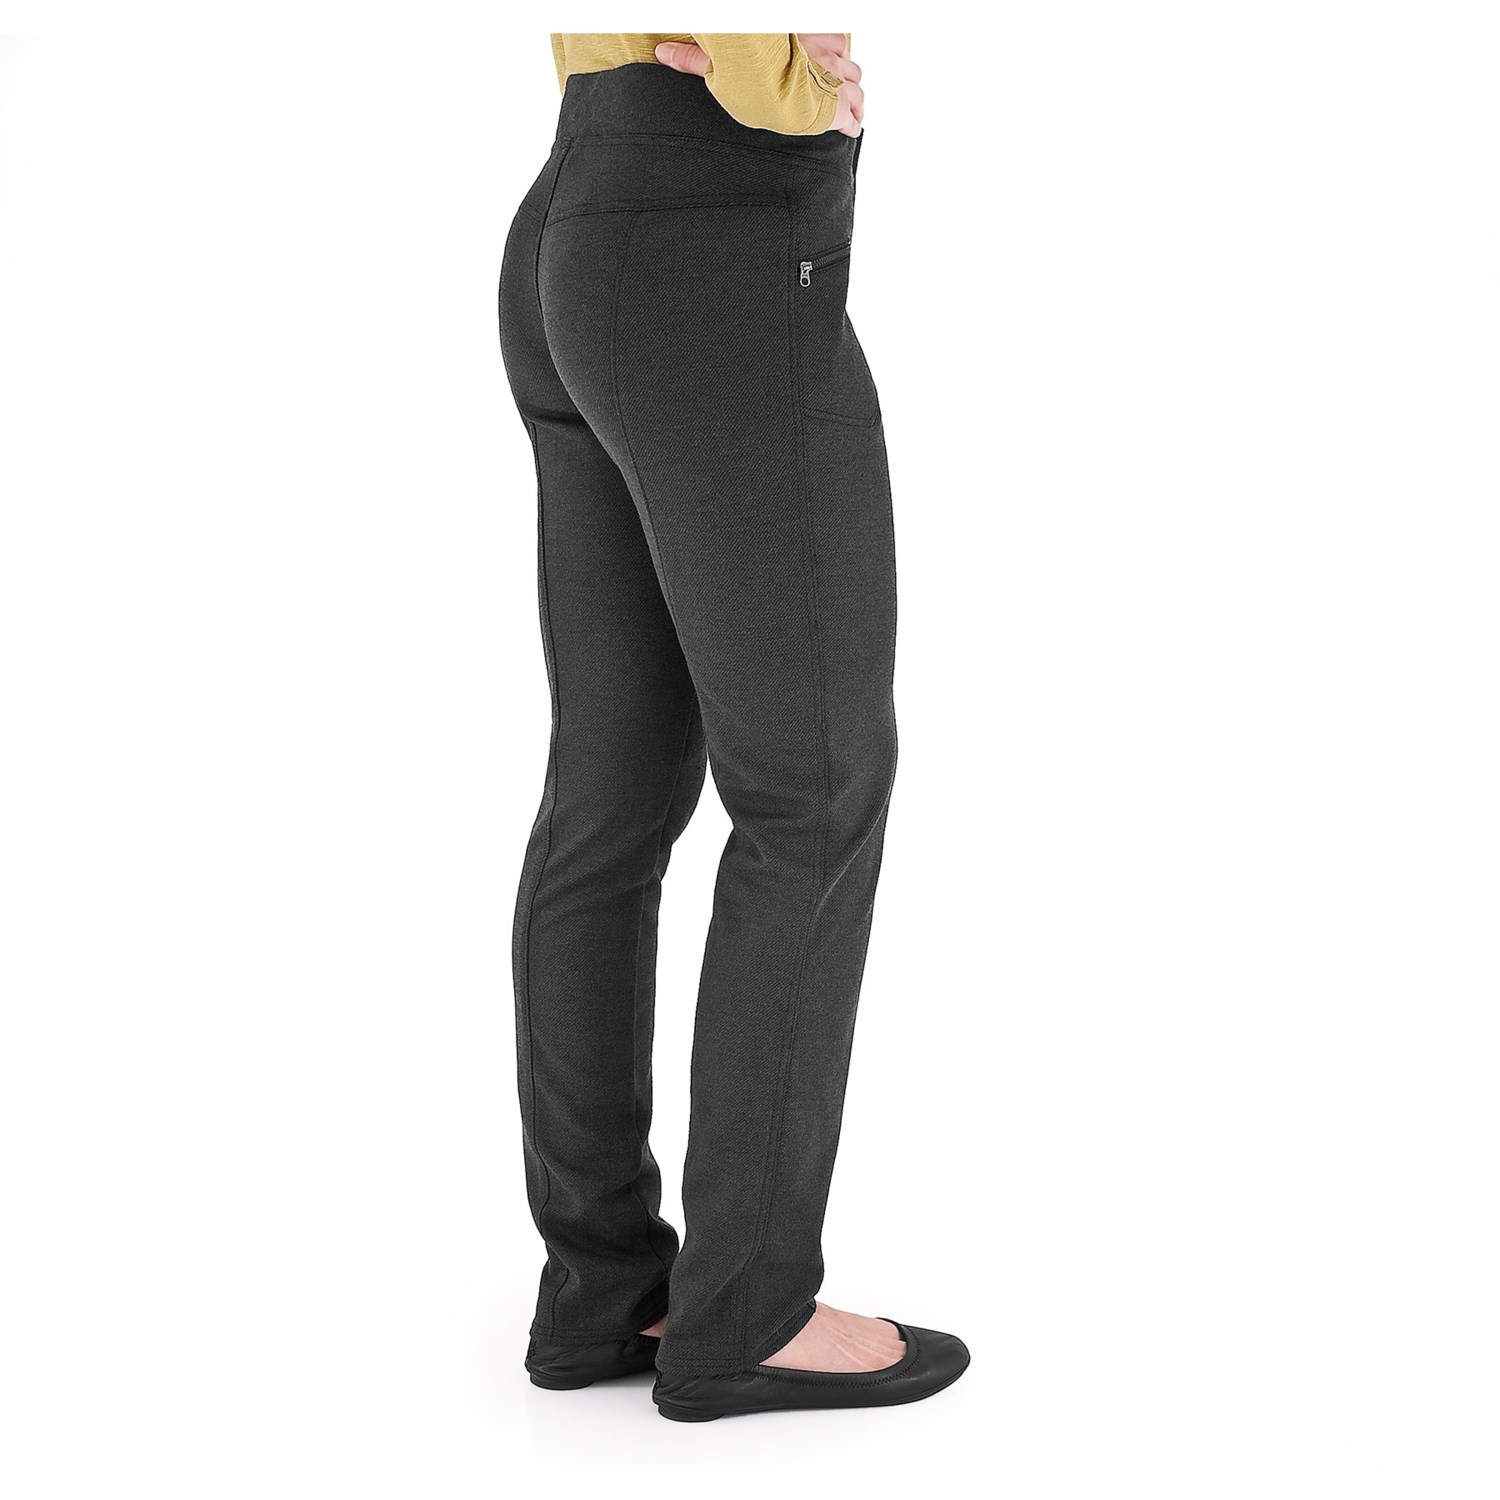 Royal Robbins Crosstown Stretch Twill Pants (For Women) - Save 35%